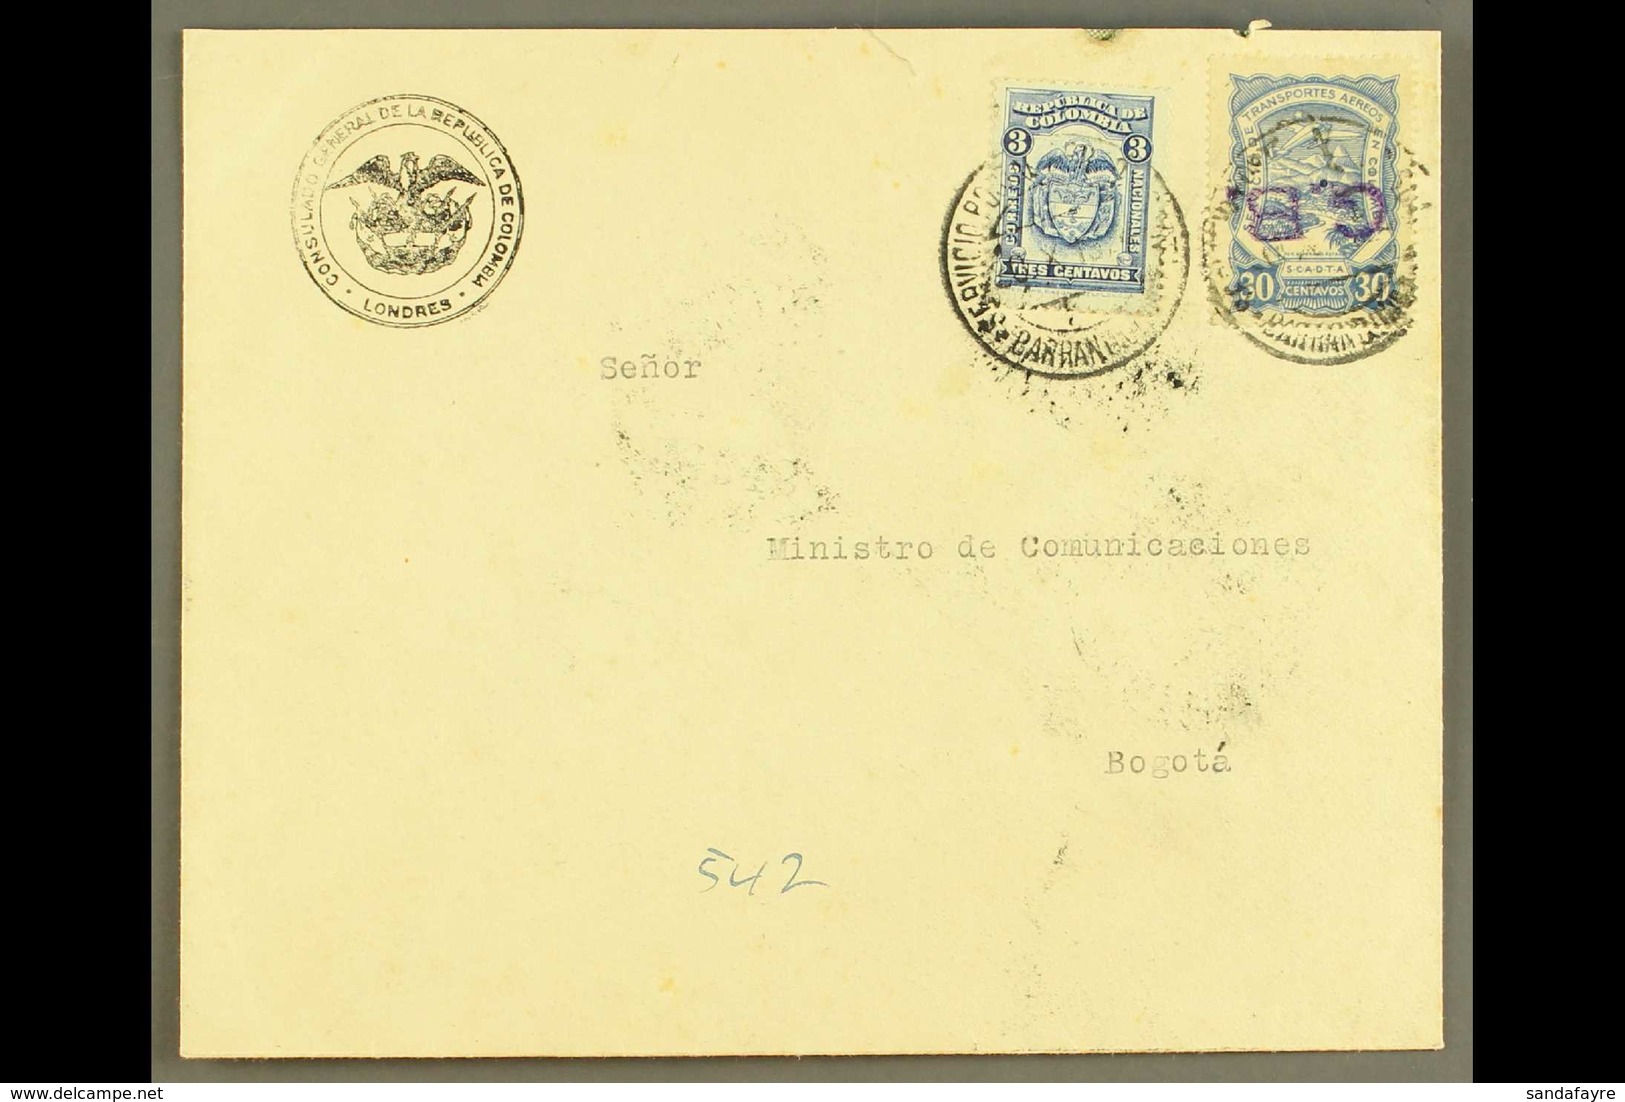 SCADTA 1924 Cover From England Addressed To Bogota, Bearing Colombia 3c And SCADTA 1923 30c With "G.B." Consular INVERTE - Kolumbien